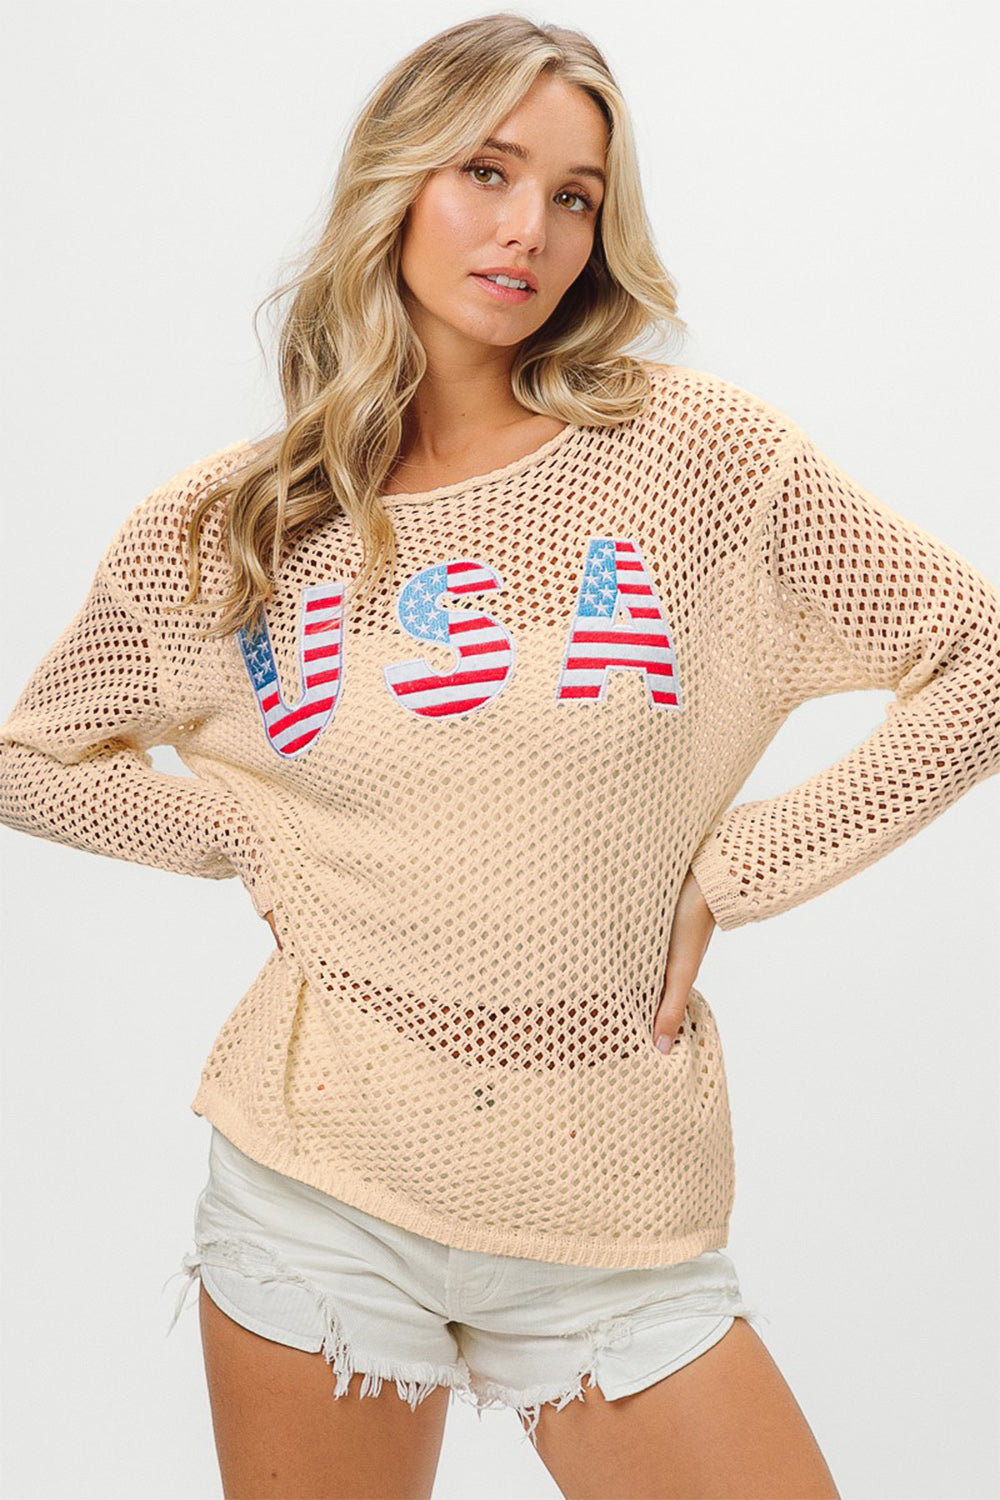 Patriotic USA Embroidered Beach Cover Up